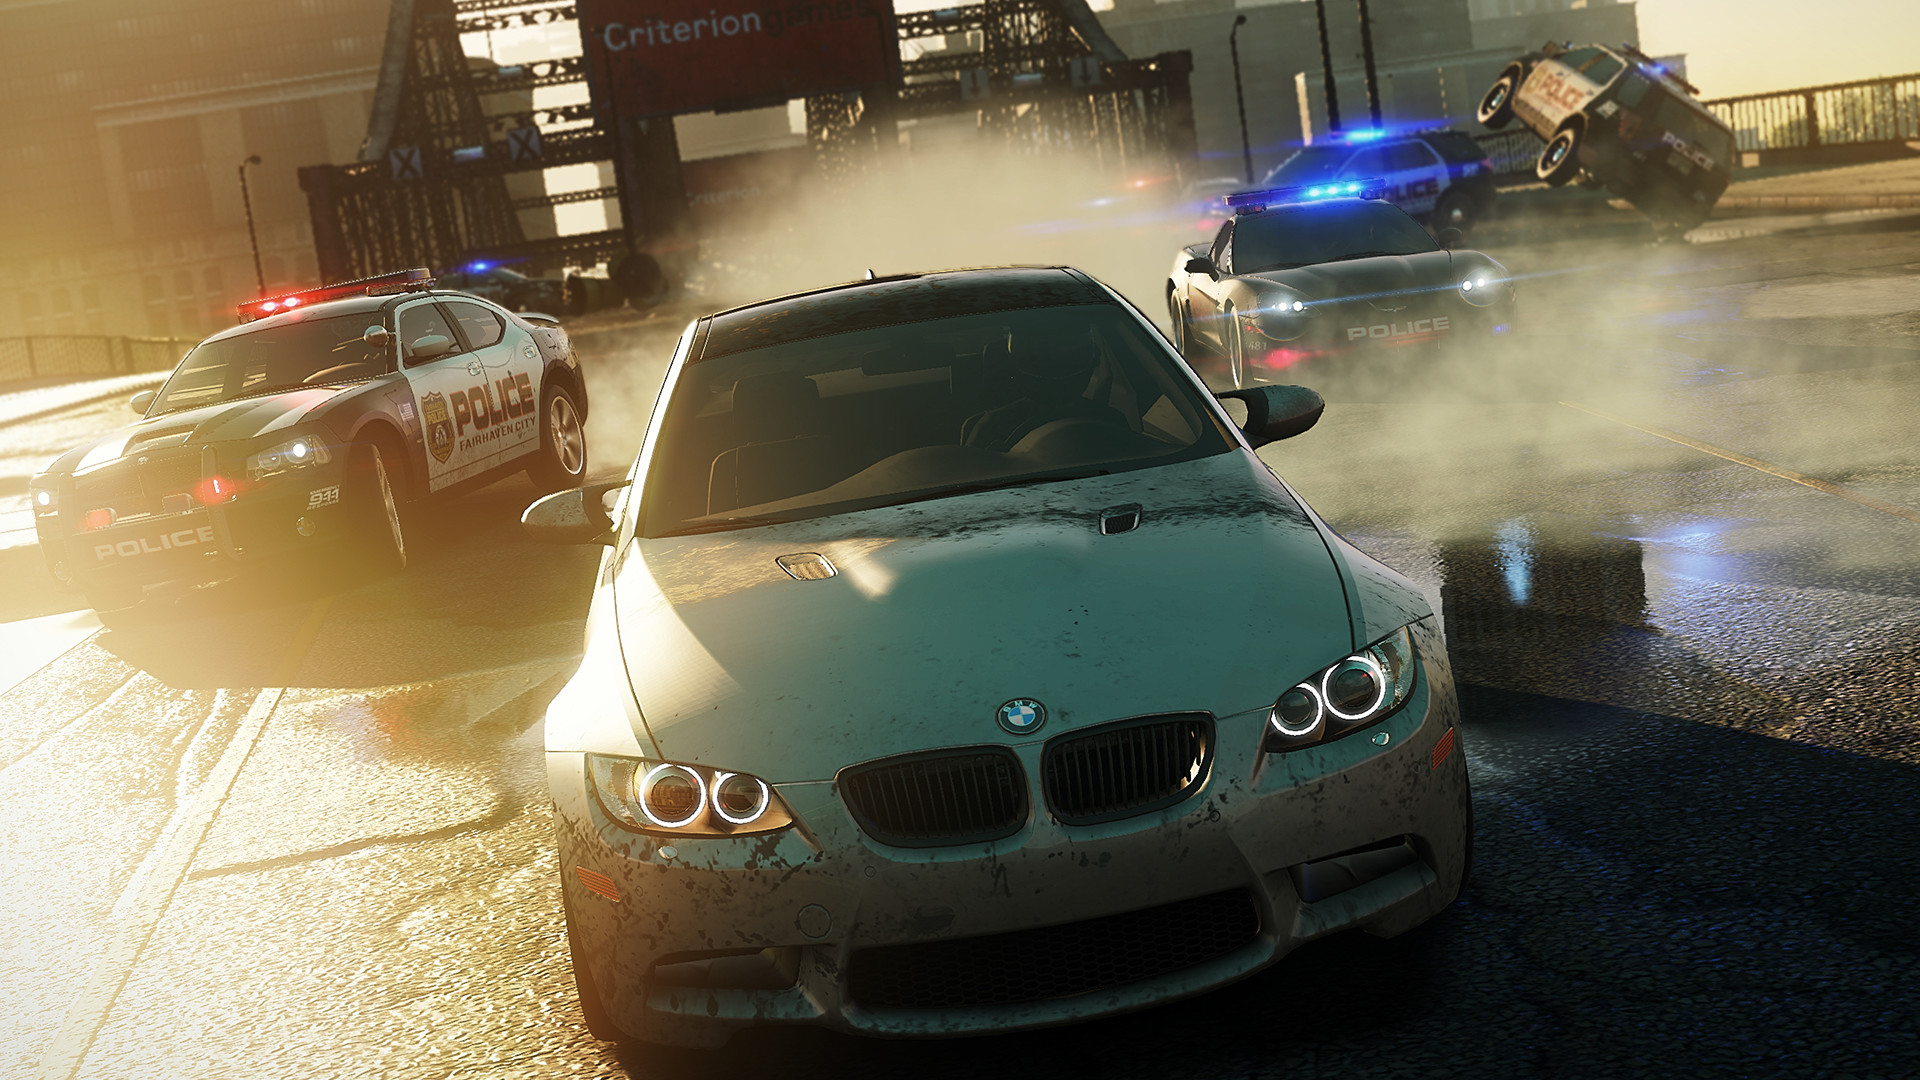 Need For Speed Most Wanted, PC